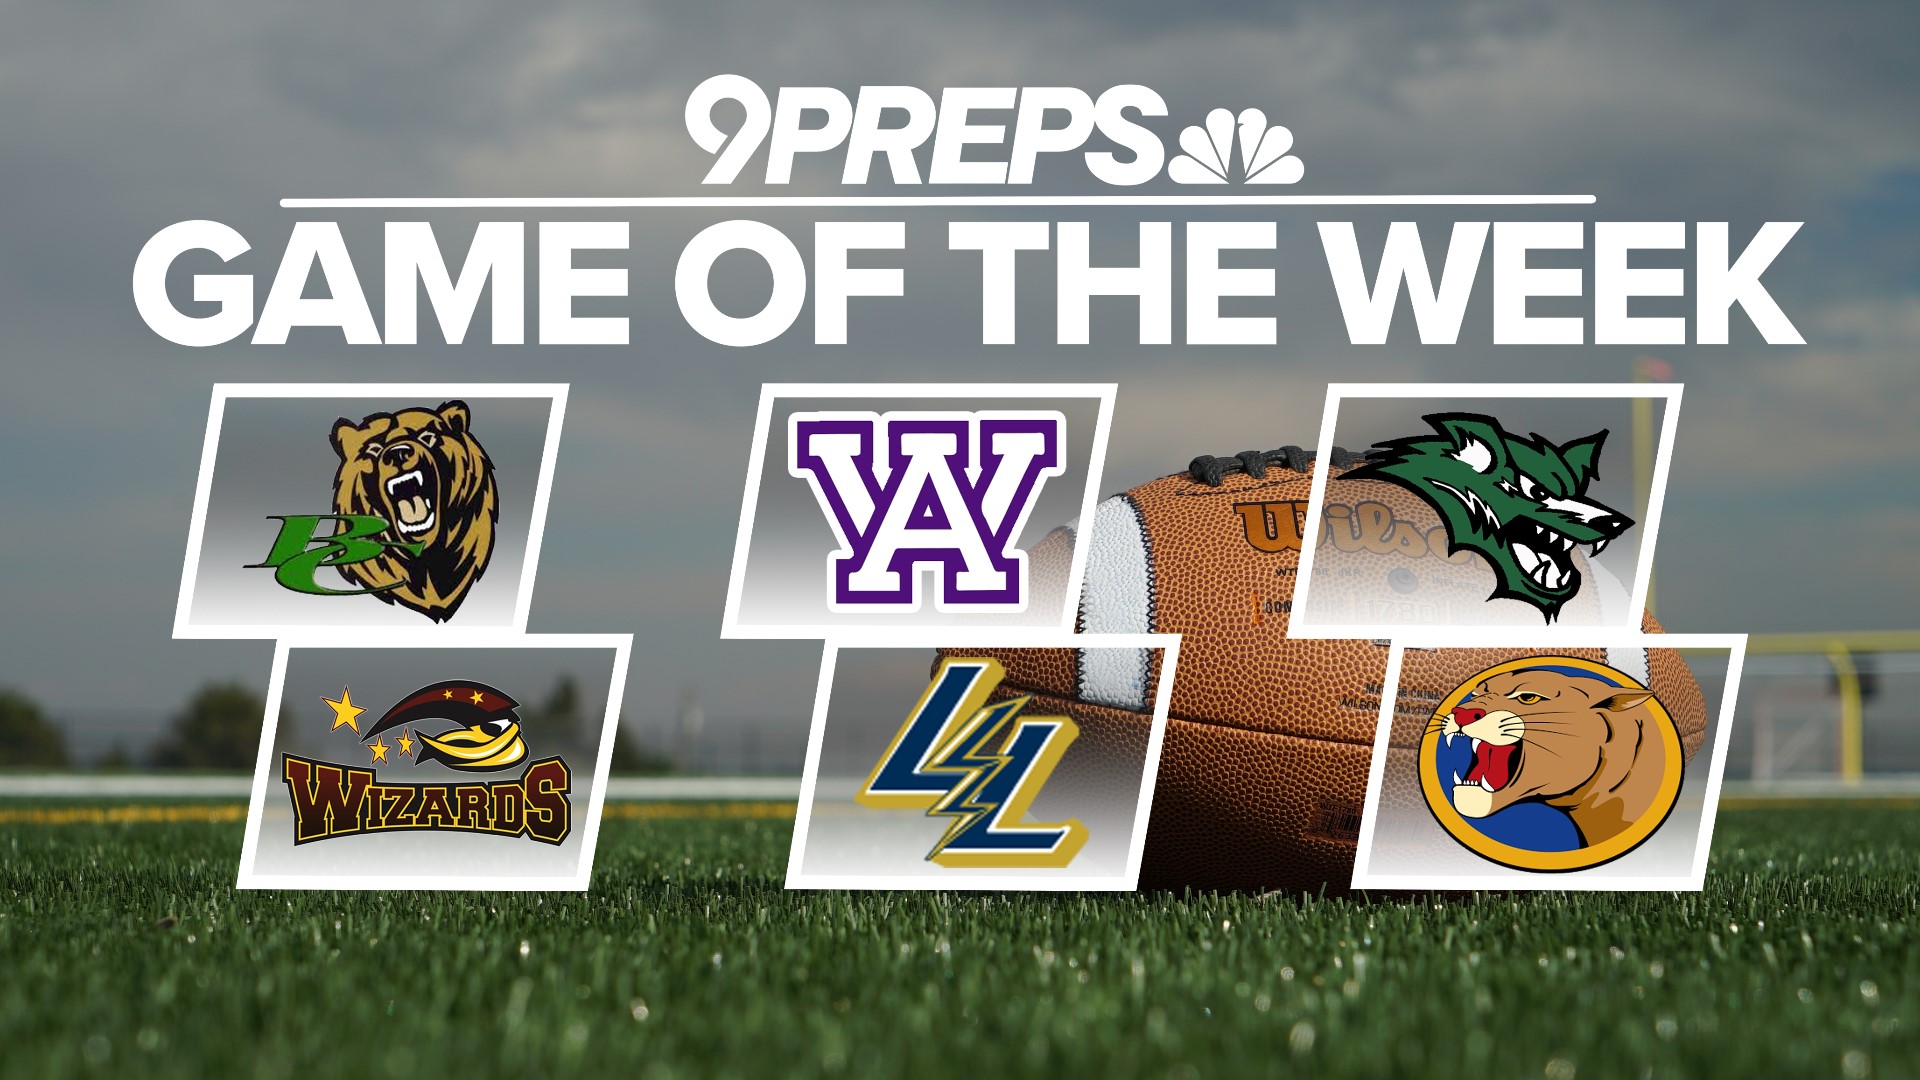 The 9Preps Game of the Week is back! Vote to determine which high school football game we showcase on Friday, Nov. 4.